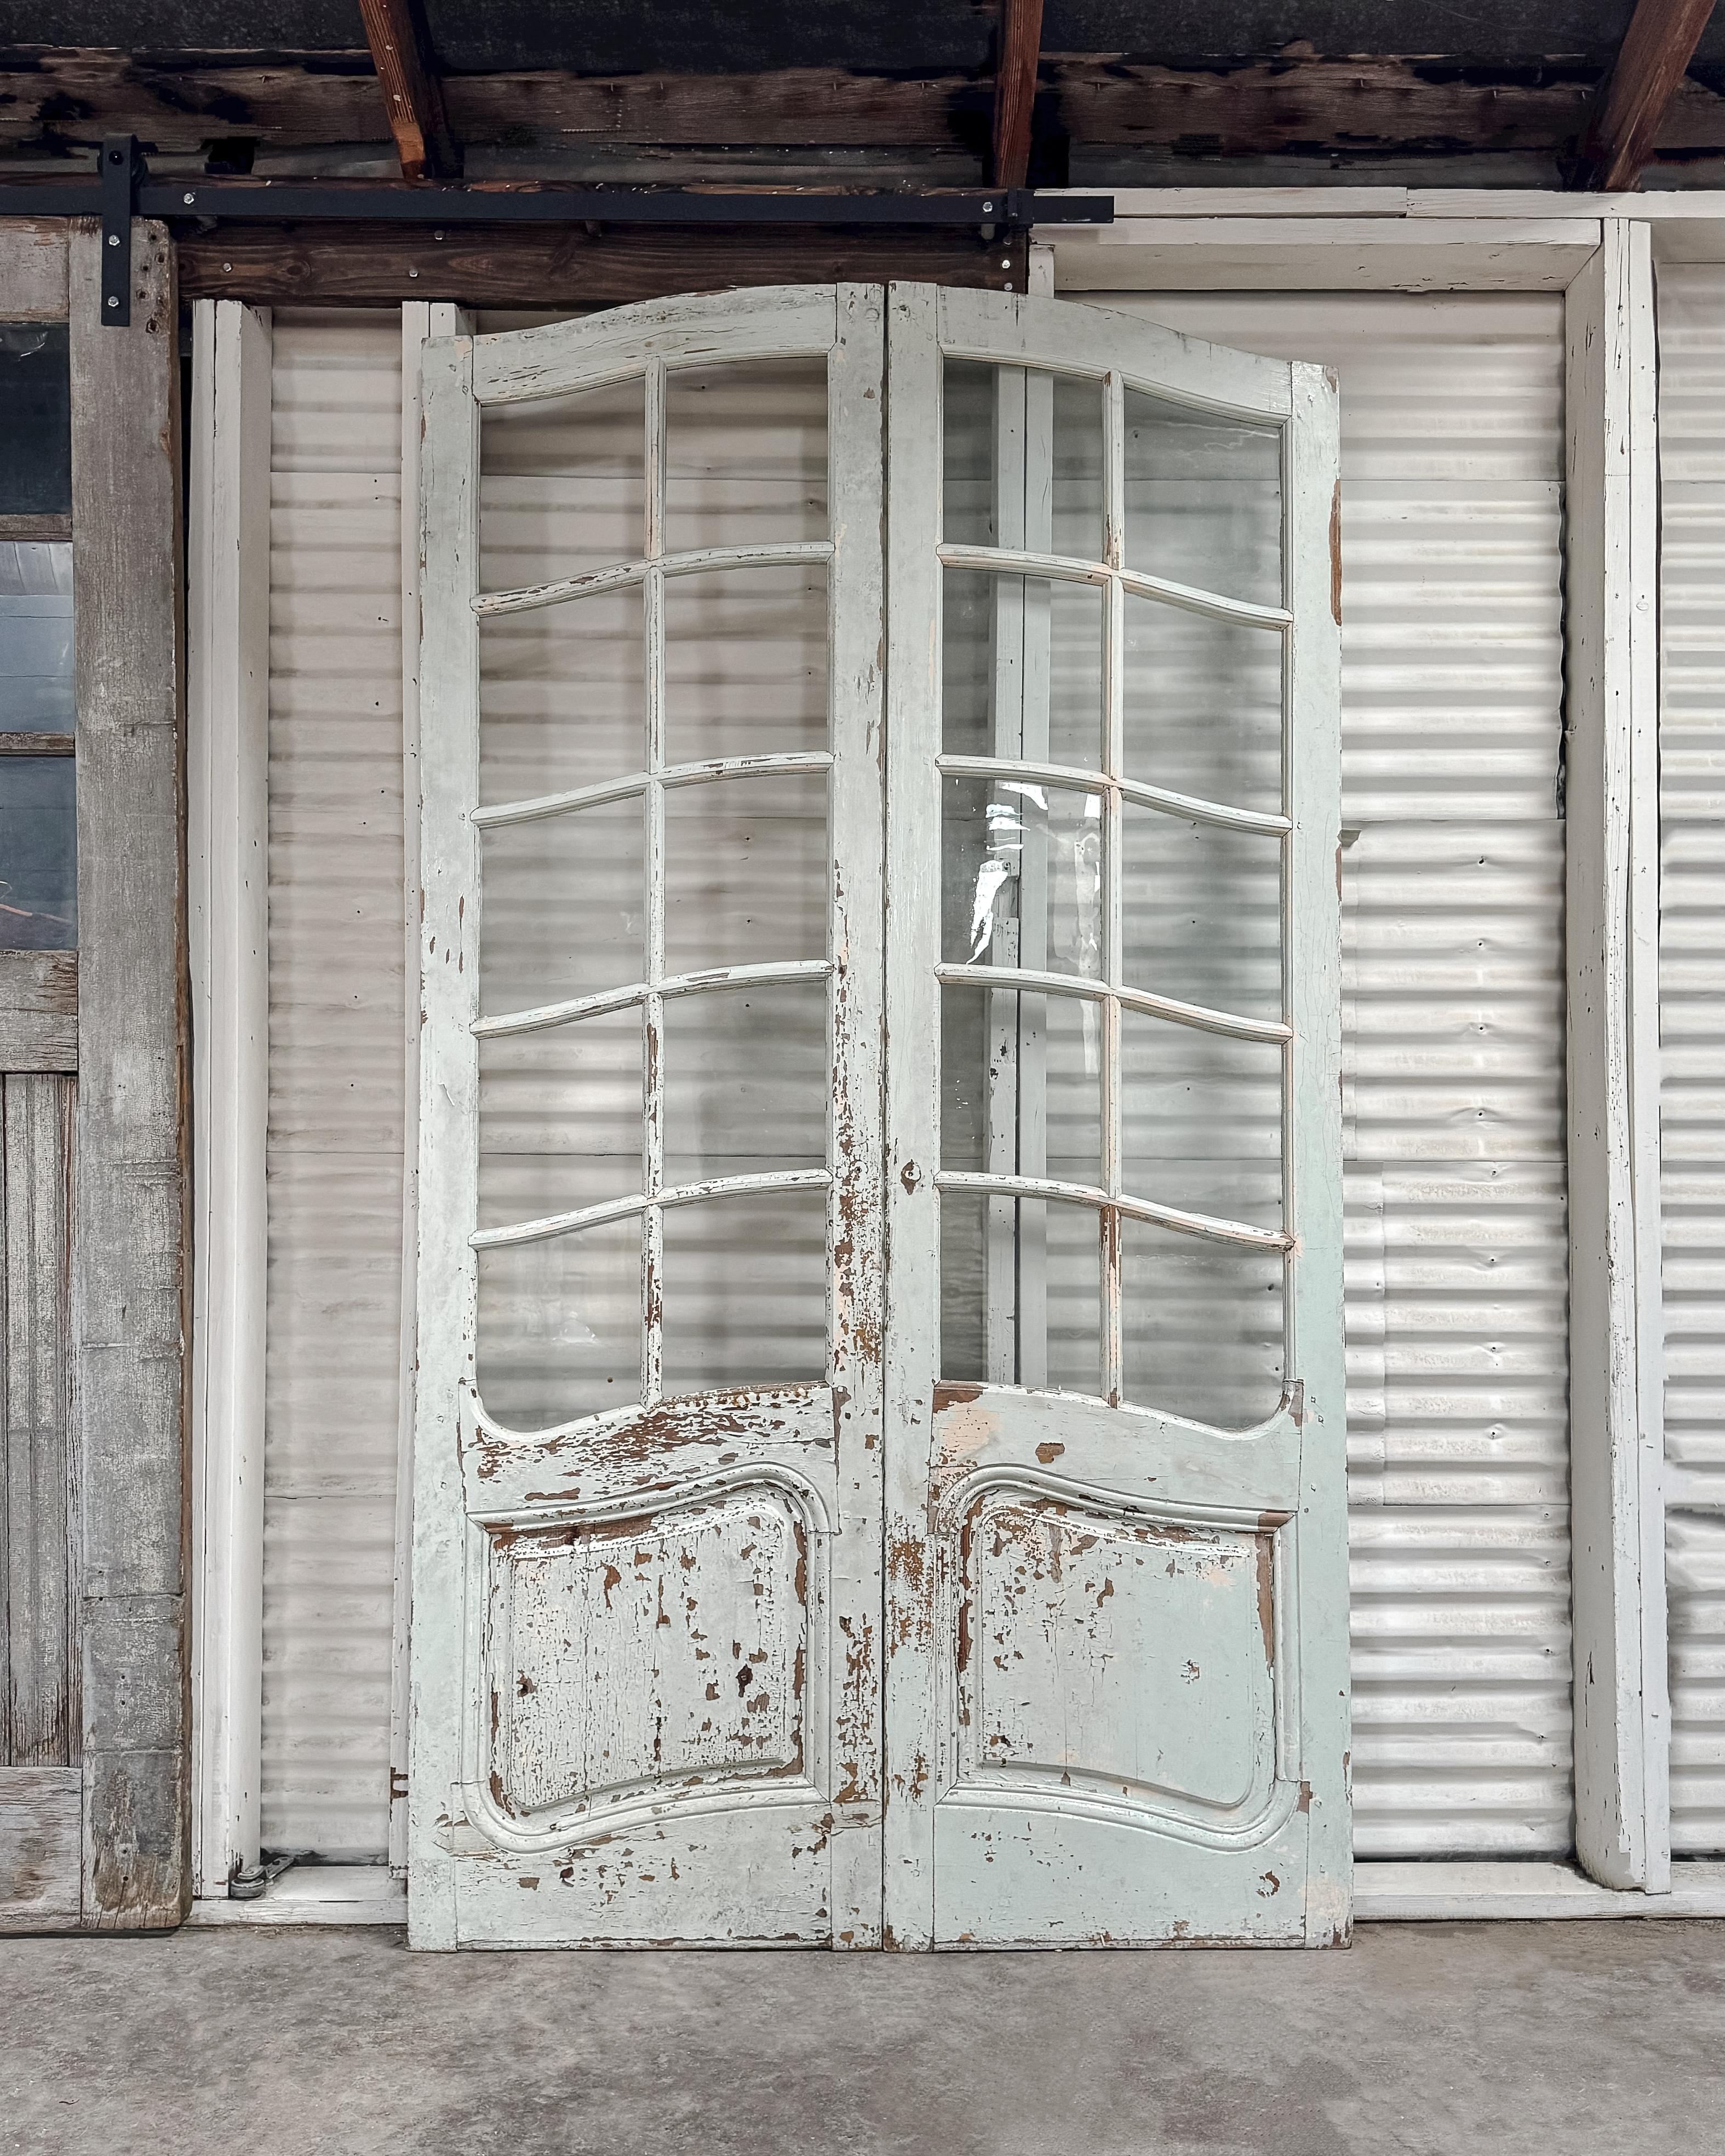 Salvaged provincial-style French exterior doors with a graceful arched top and worn pale seafoam green paint. Each door contains 10 lites that are framed with beveled molding. The lower panels are molded to emulate the door’s curved arch. An iron